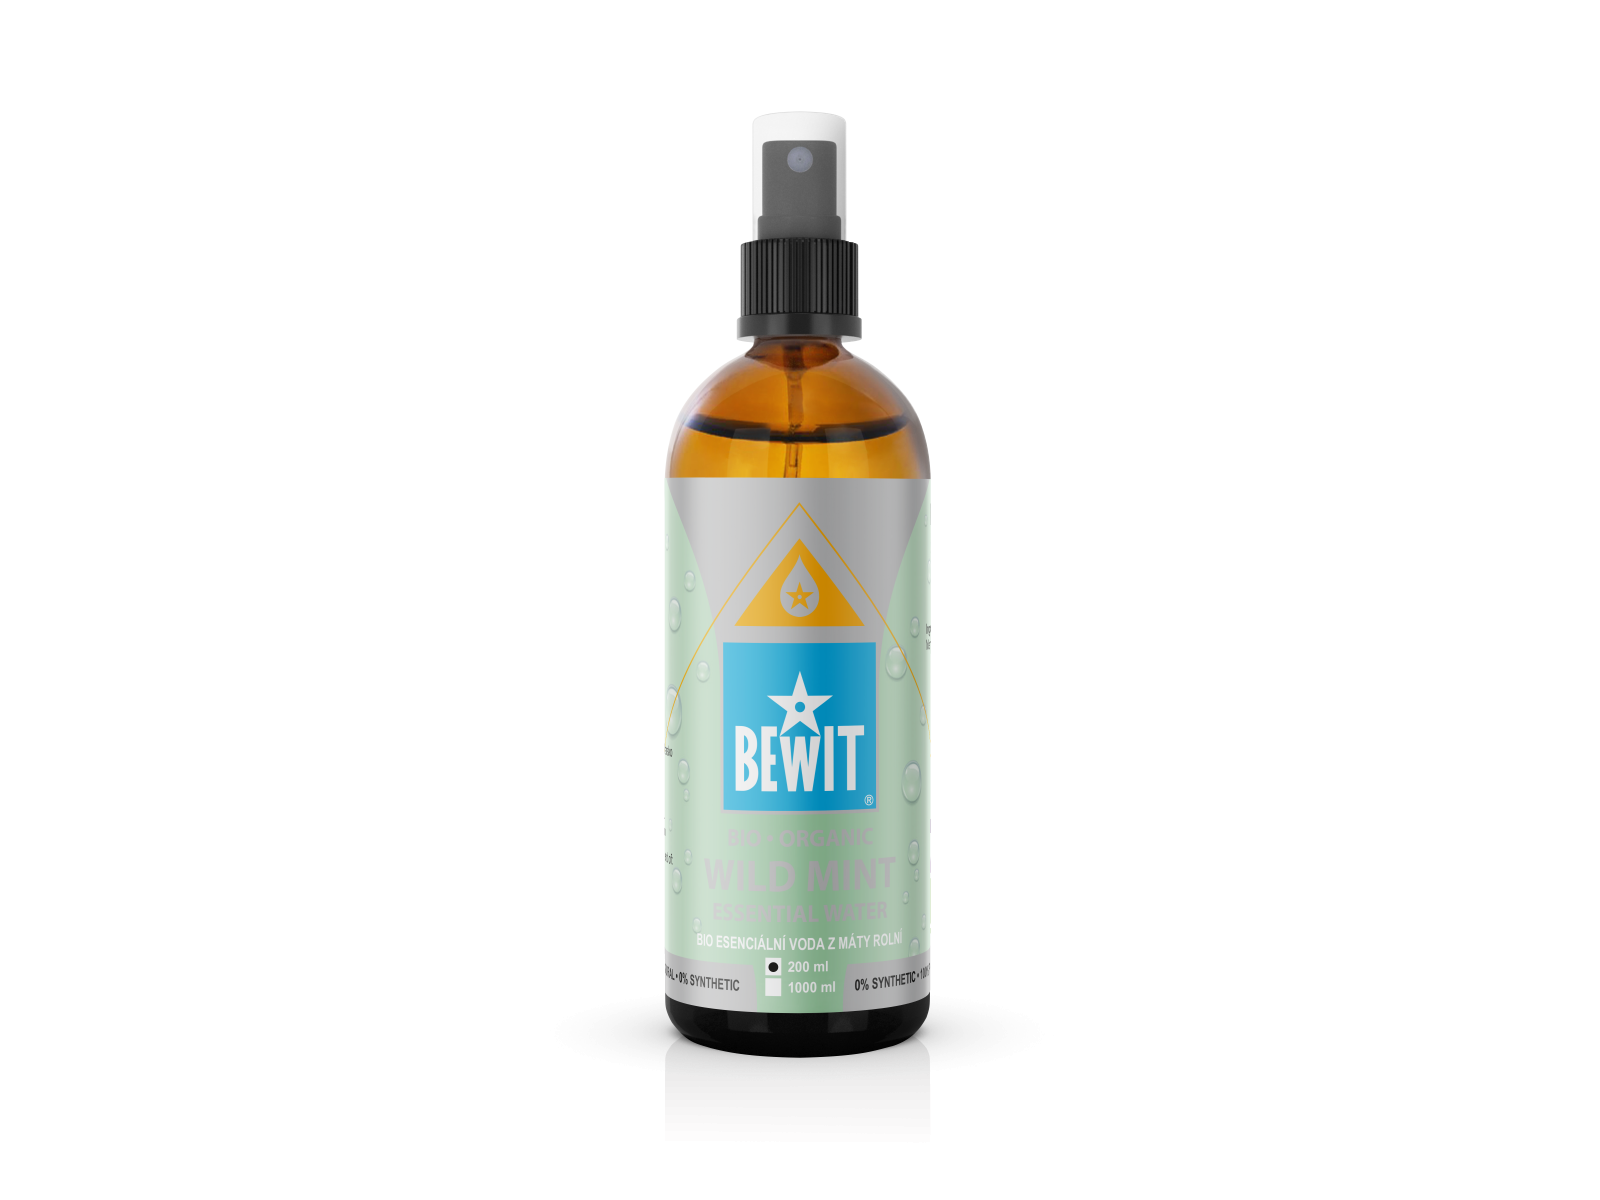 BEWIT Organic mint essential water - 100% NATURAL HYDROLYTE